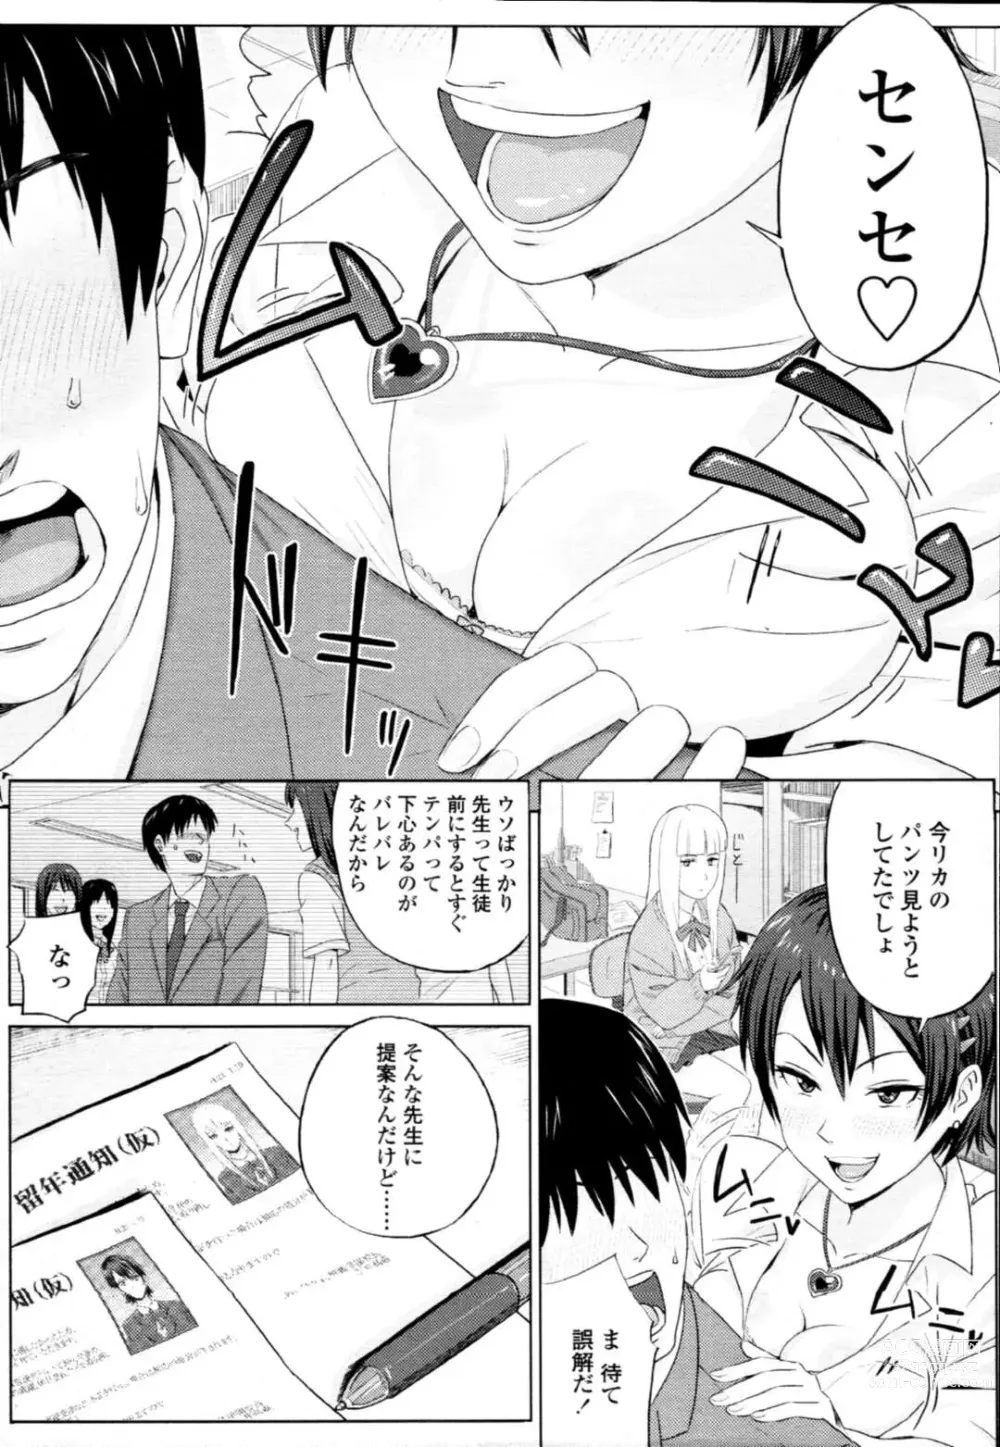 Page 4 of doujinshi Sassy Gal JKs Having Harem Sex with Teachers... Lewd Girls Climax by Letting Him Fuck Them Vaginally and Anally!